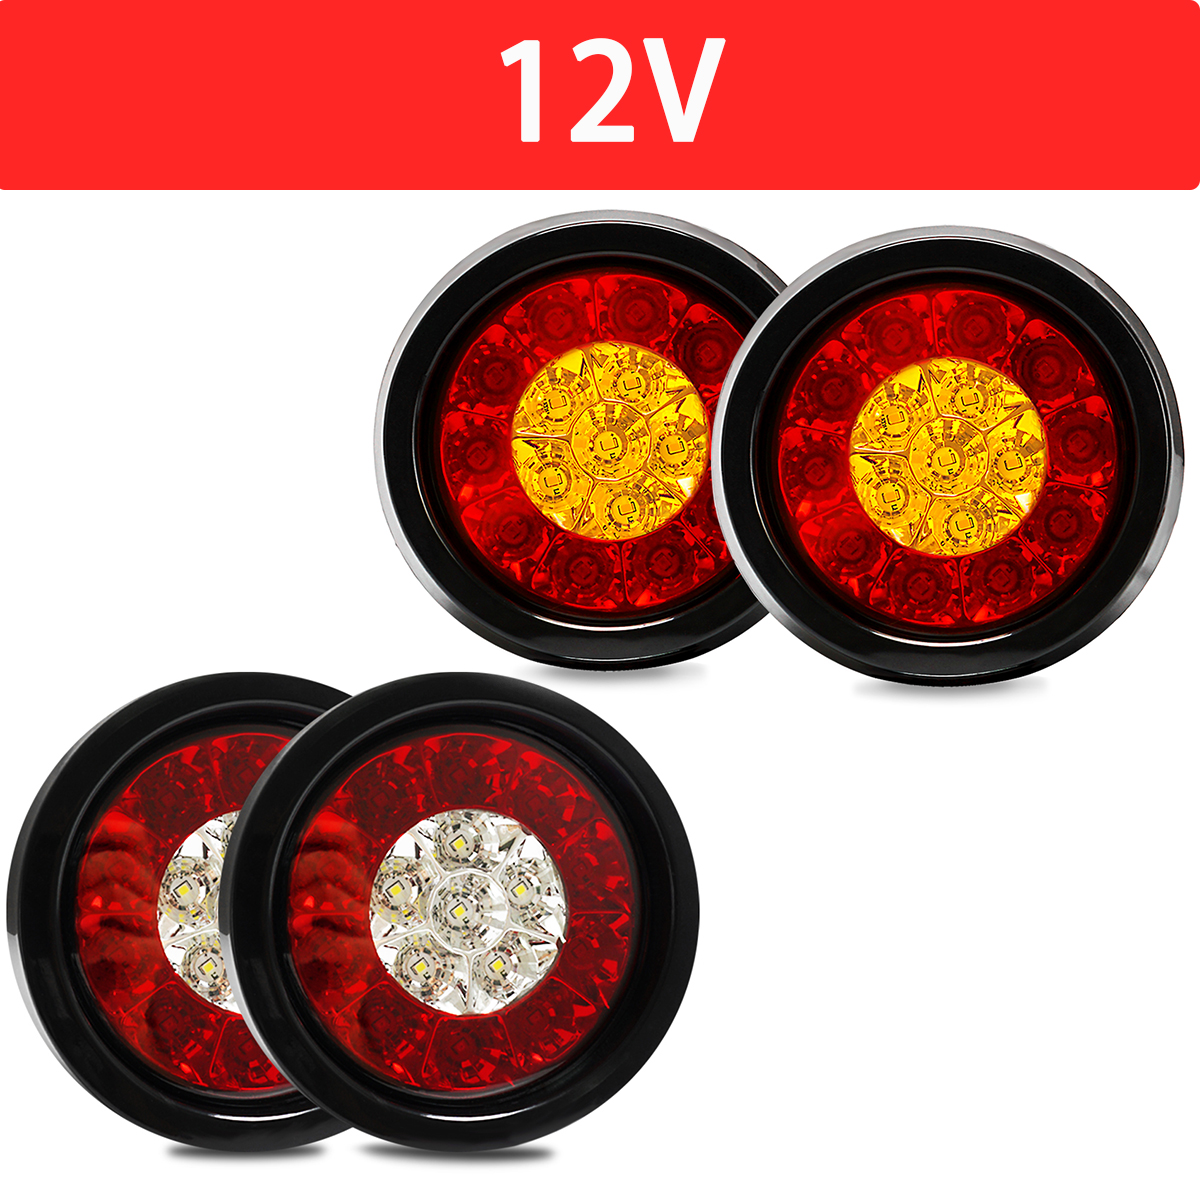 Red Taillights with Rubber Grommet 16LED DC 12V Waterproof Stop Brake Running Reverse Backup Lights Tail Lamps for RV Trailer Pack of 2 4’’ Inch Round LED Truck/Trailer White 2 Red/White Lights 